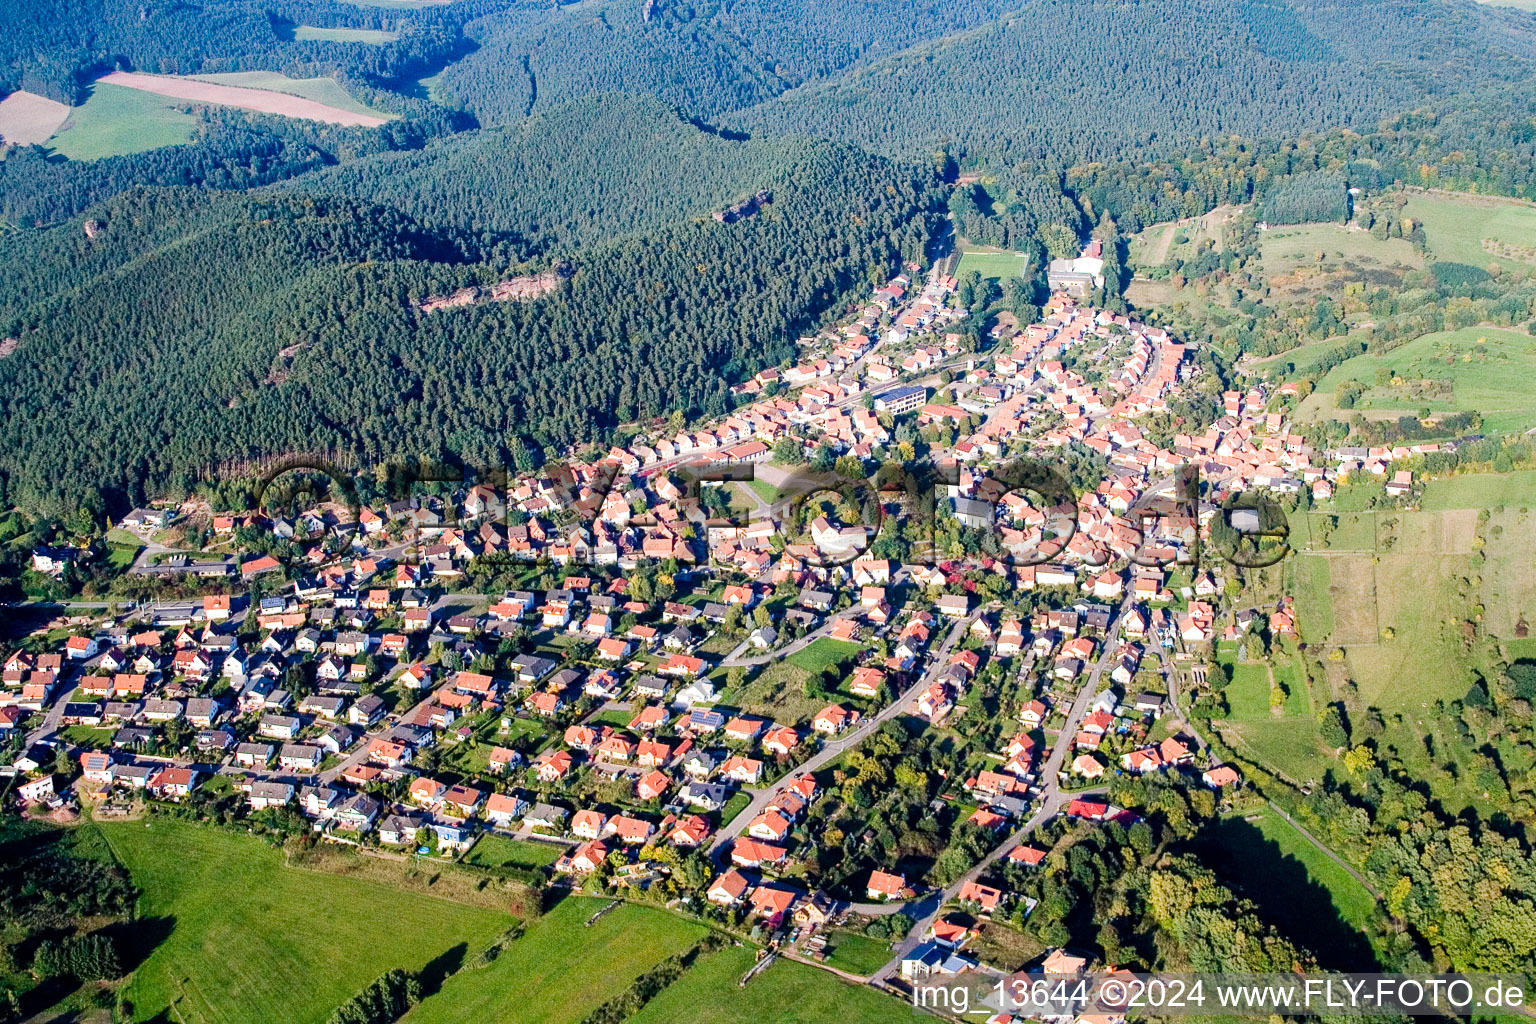 Drone image of Busenberg in the state Rhineland-Palatinate, Germany